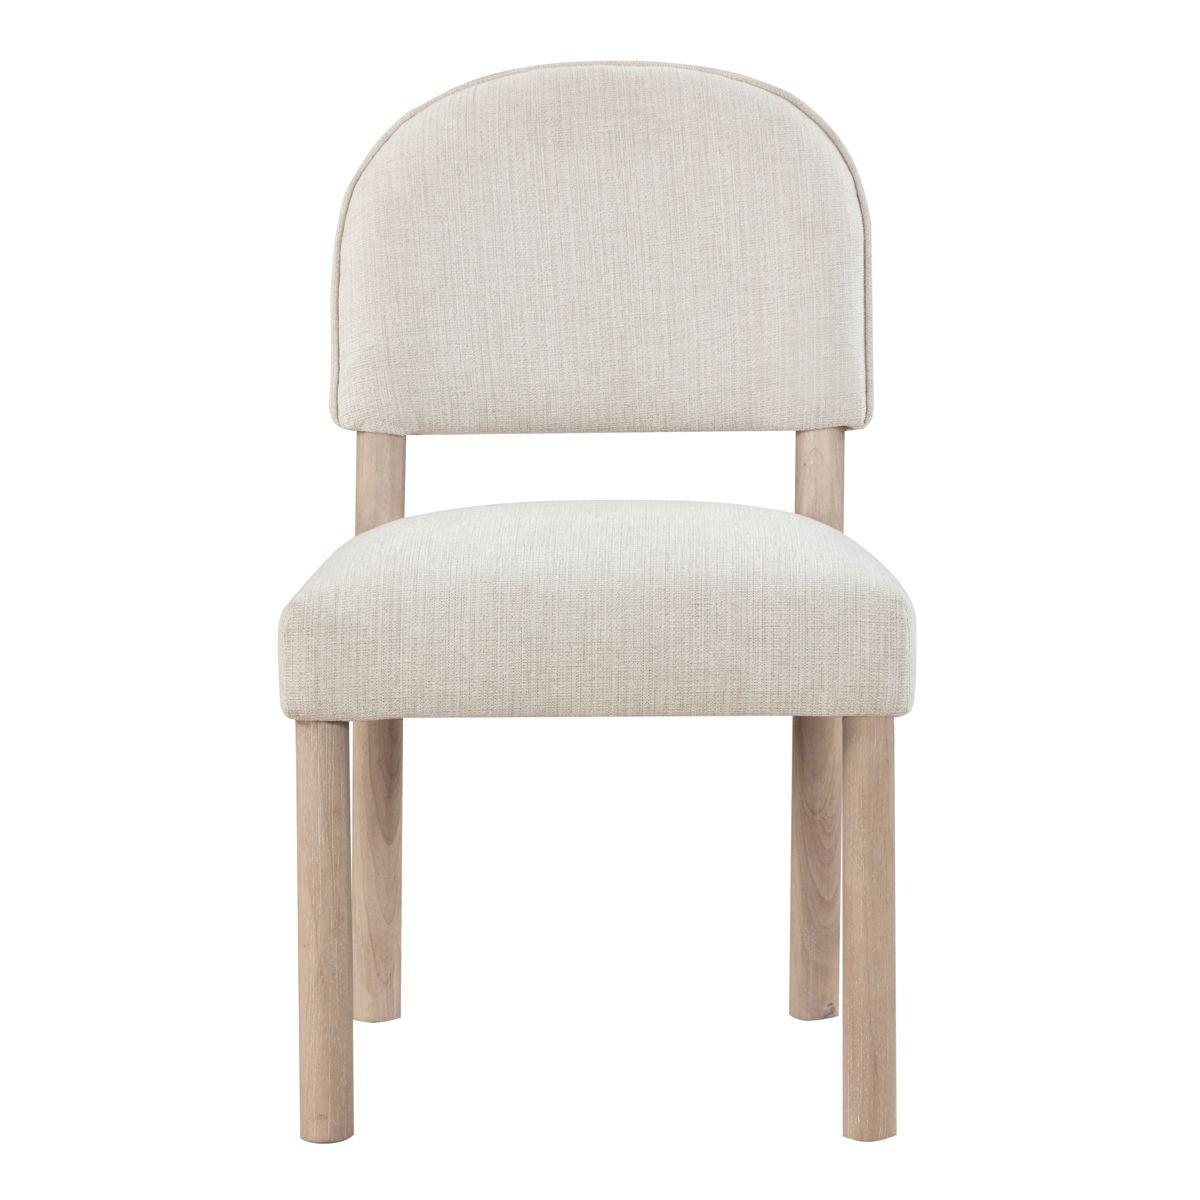 Steve Silver Furniture - Gabby - Side Chair (Set of 2) - Light Brown - 5th Avenue Furniture